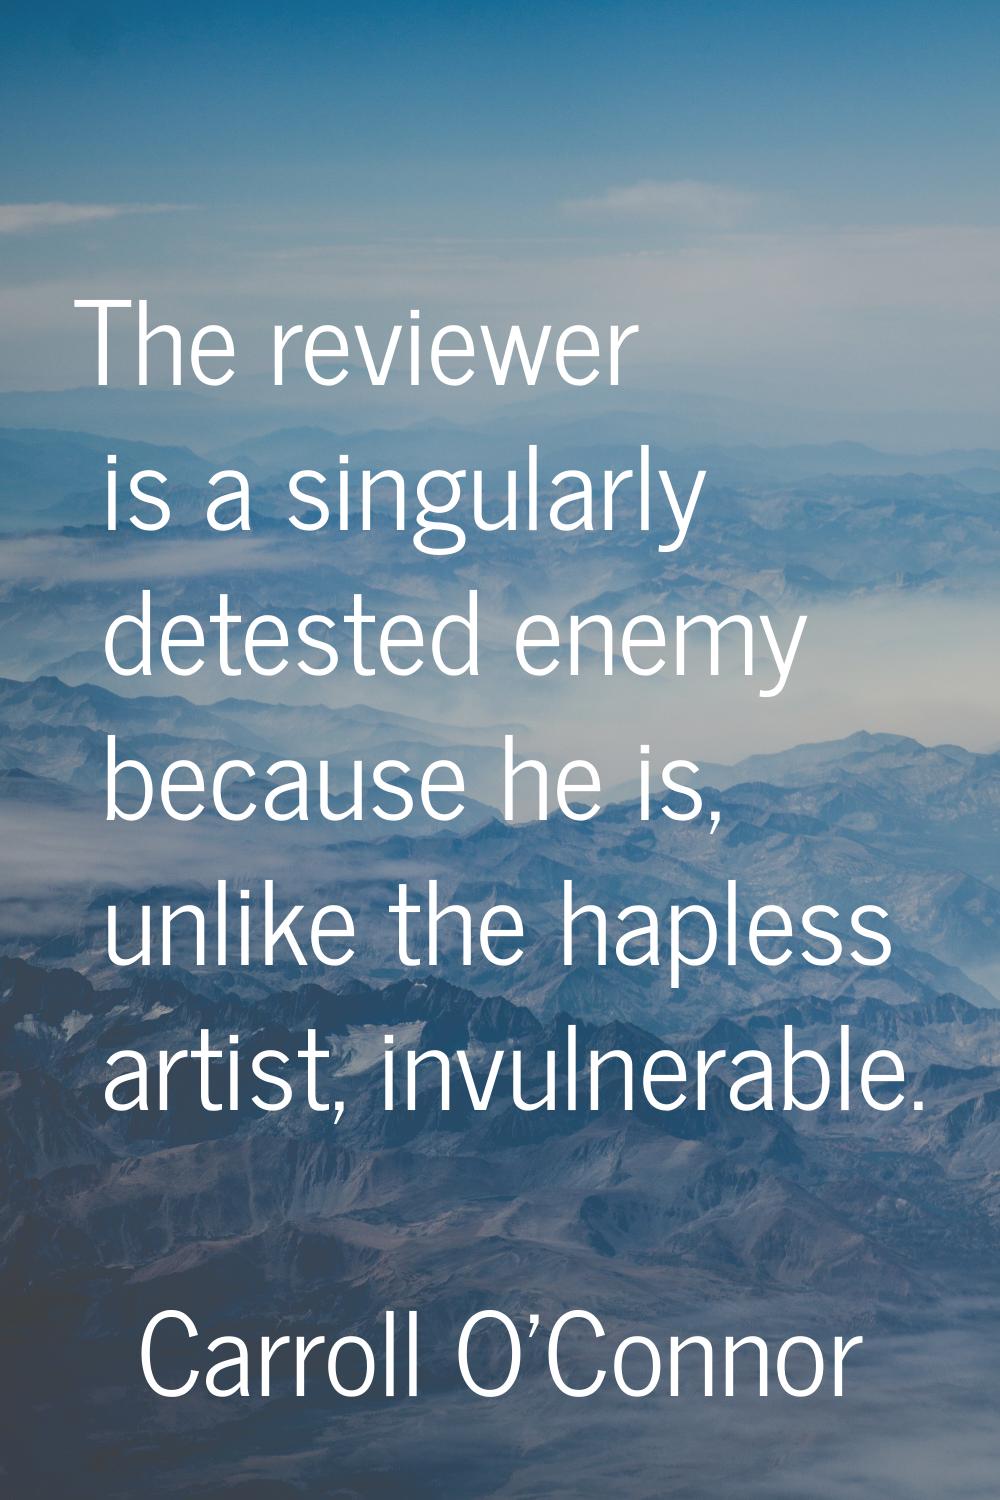 The reviewer is a singularly detested enemy because he is, unlike the hapless artist, invulnerable.